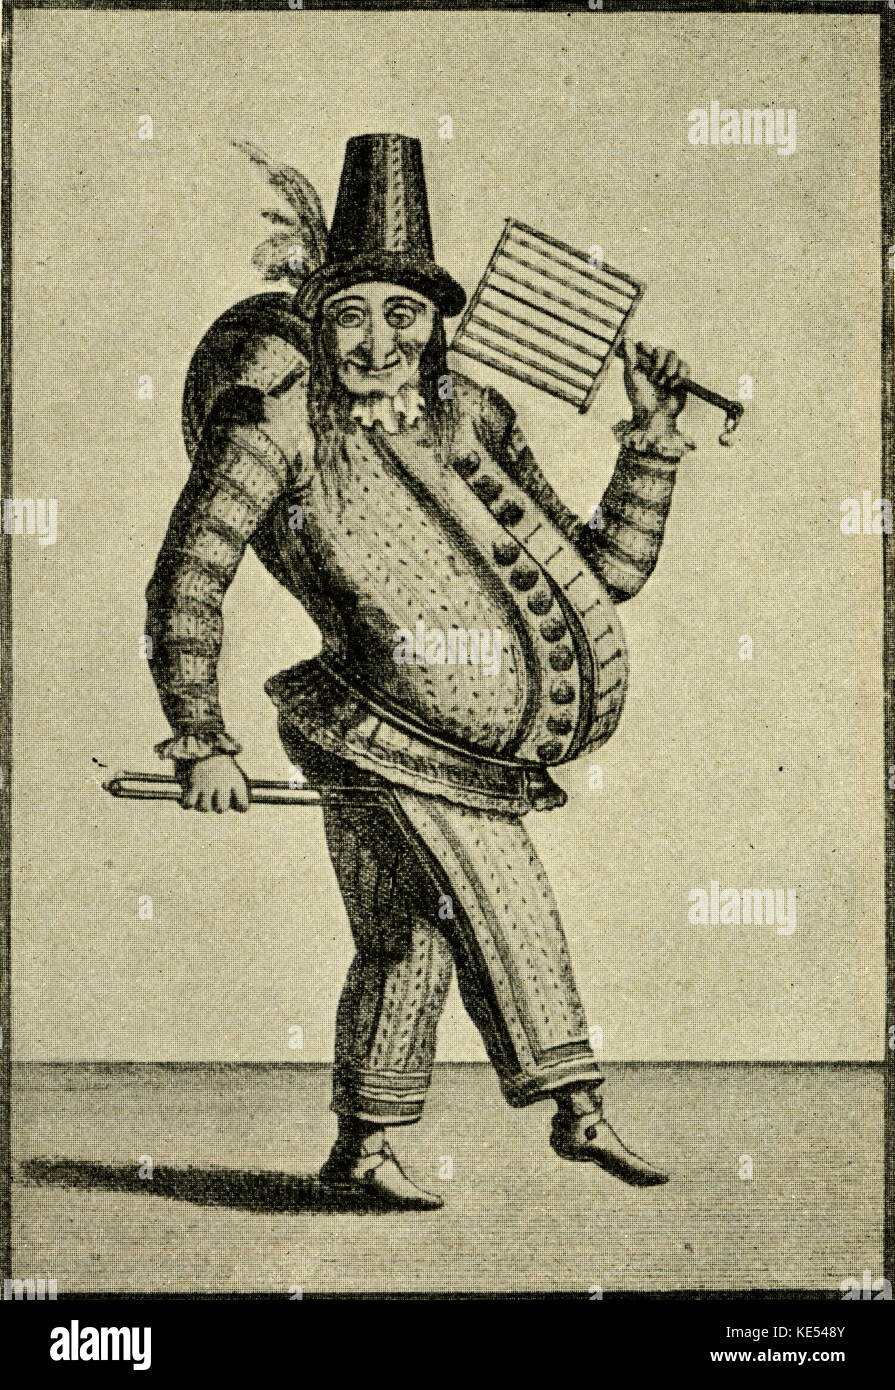 Pulcinella Pulcinella. Illustration by N. Bonnart, c. 1650. After Holl. German comedy. Character from Commedia dell'arte.( Punch and Judy) Stock Photo